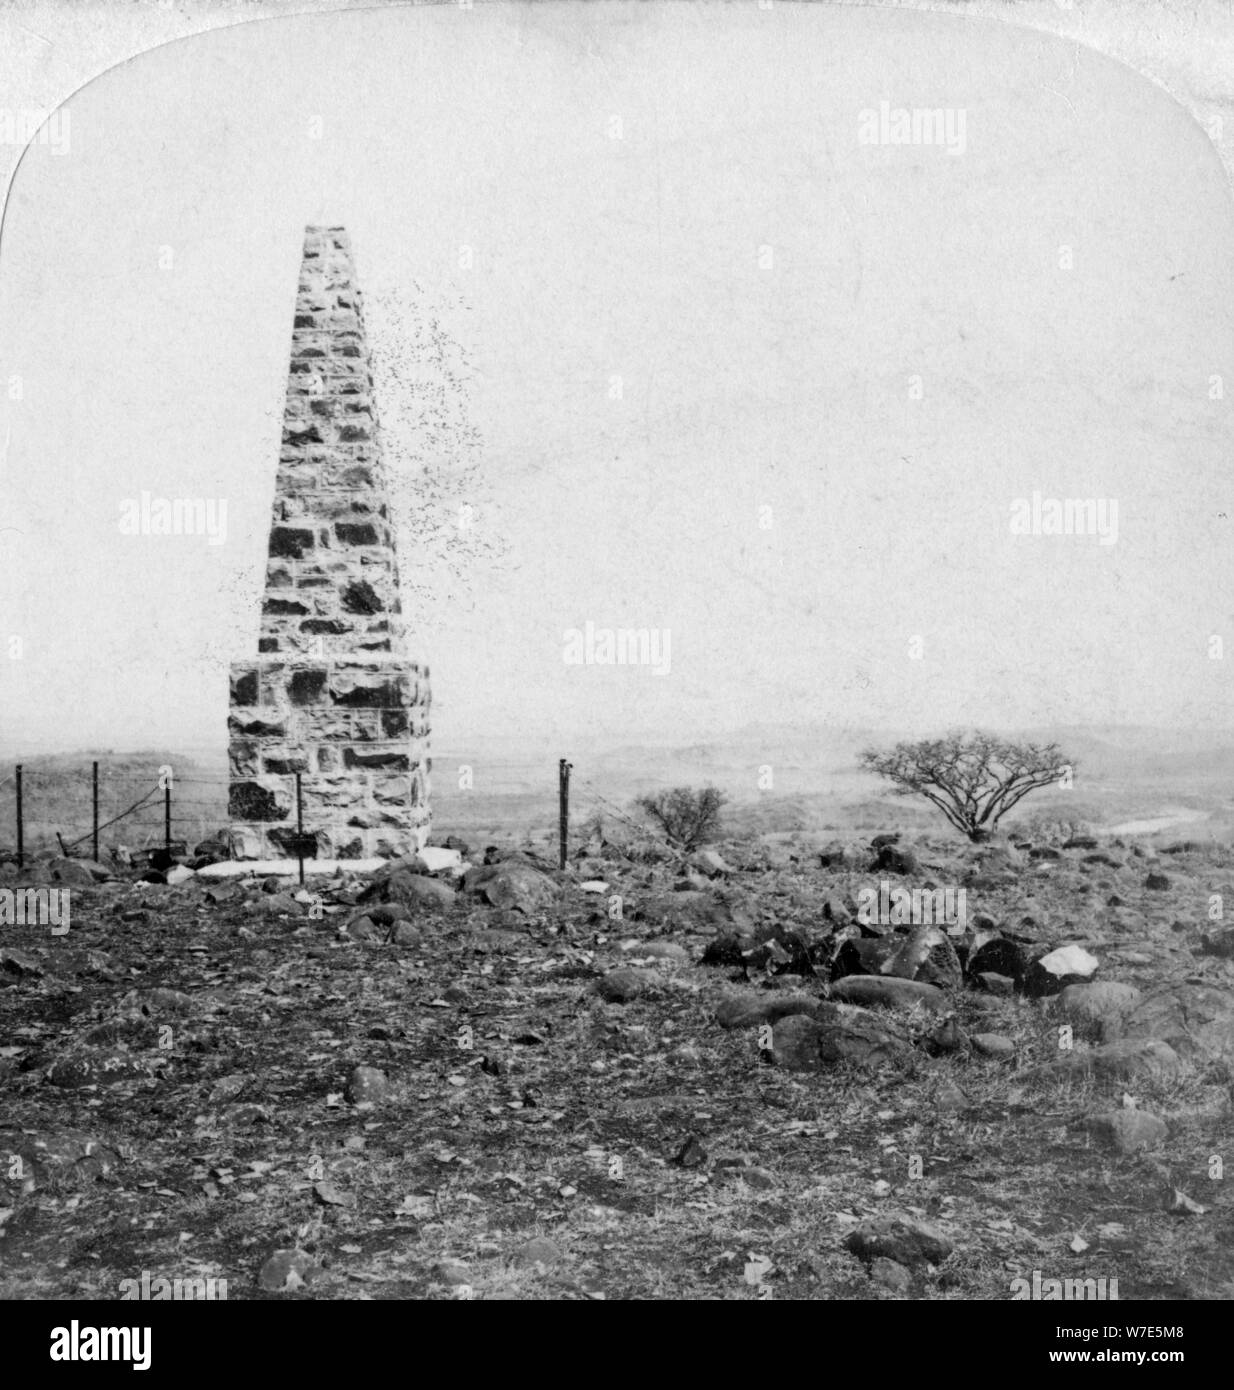 Monument to the 27th Inniskillings, Hart's Hill, near Colenso, Natal, South Africa, Boer War, 1901. Artist: Underwood & Underwood Stock Photo